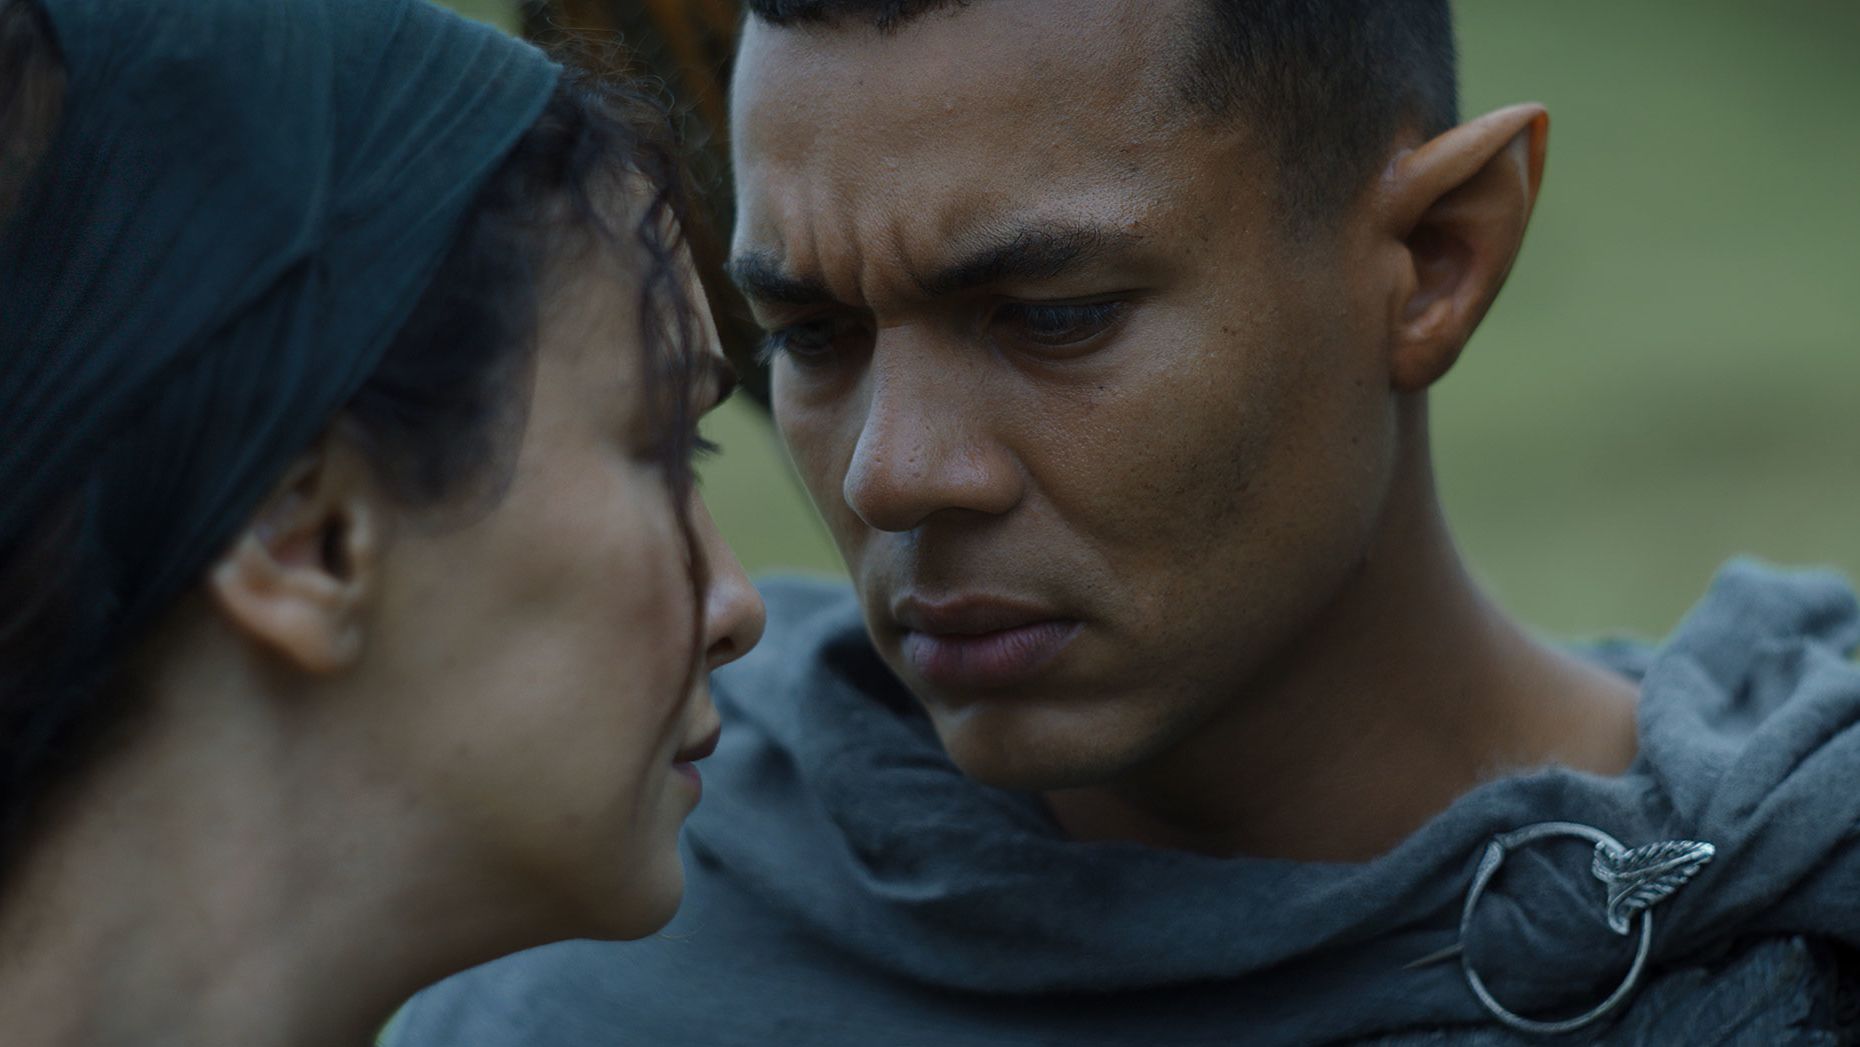 Arondir the Silvan Elf (Ismael Cruz Cordova) shares a tender moment with Bronwyn (Nazanin Boniadi). The two characters were created for the series.